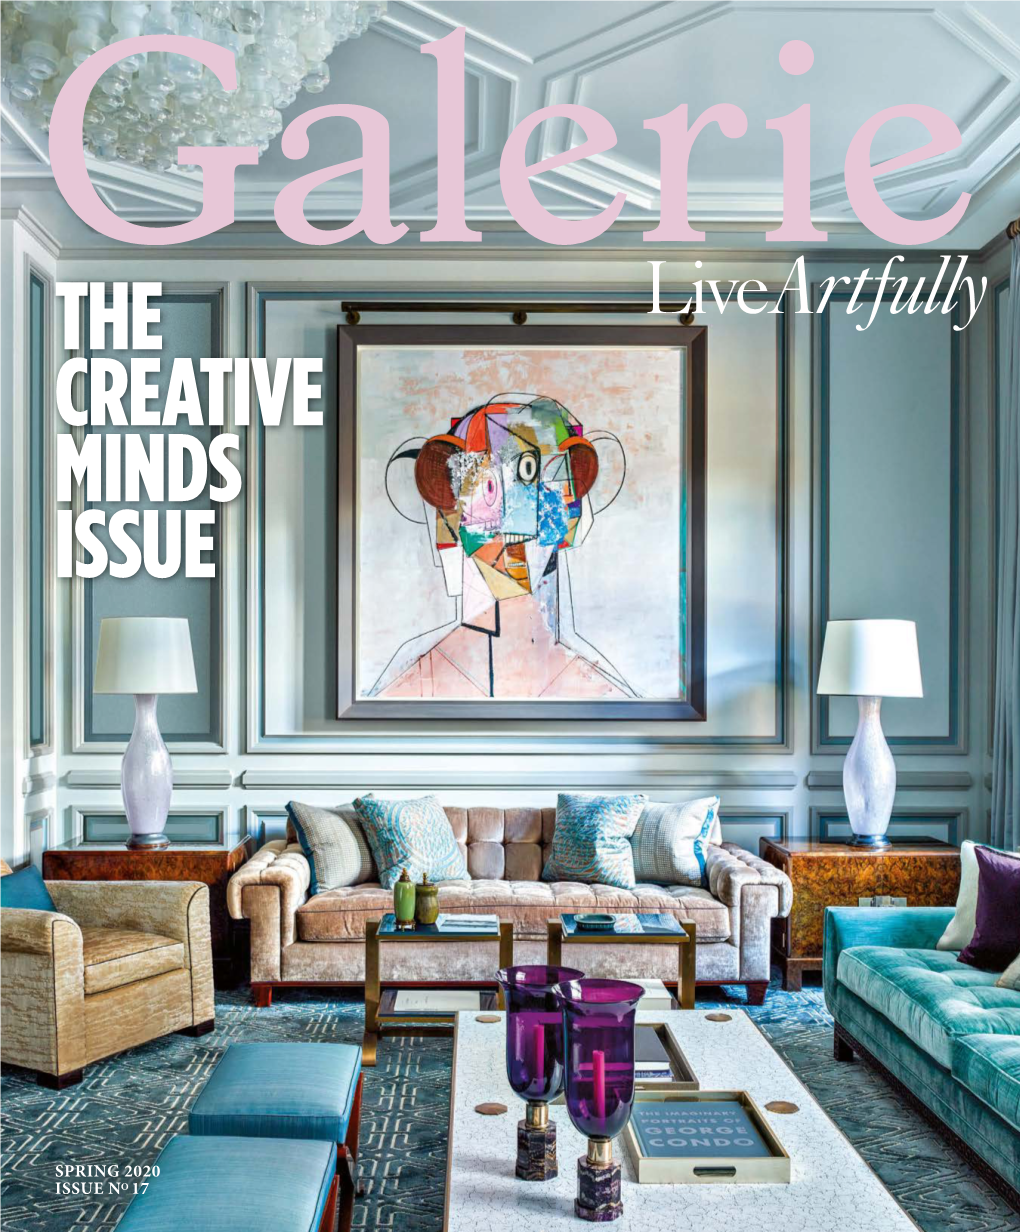 The Creative Minds Issue